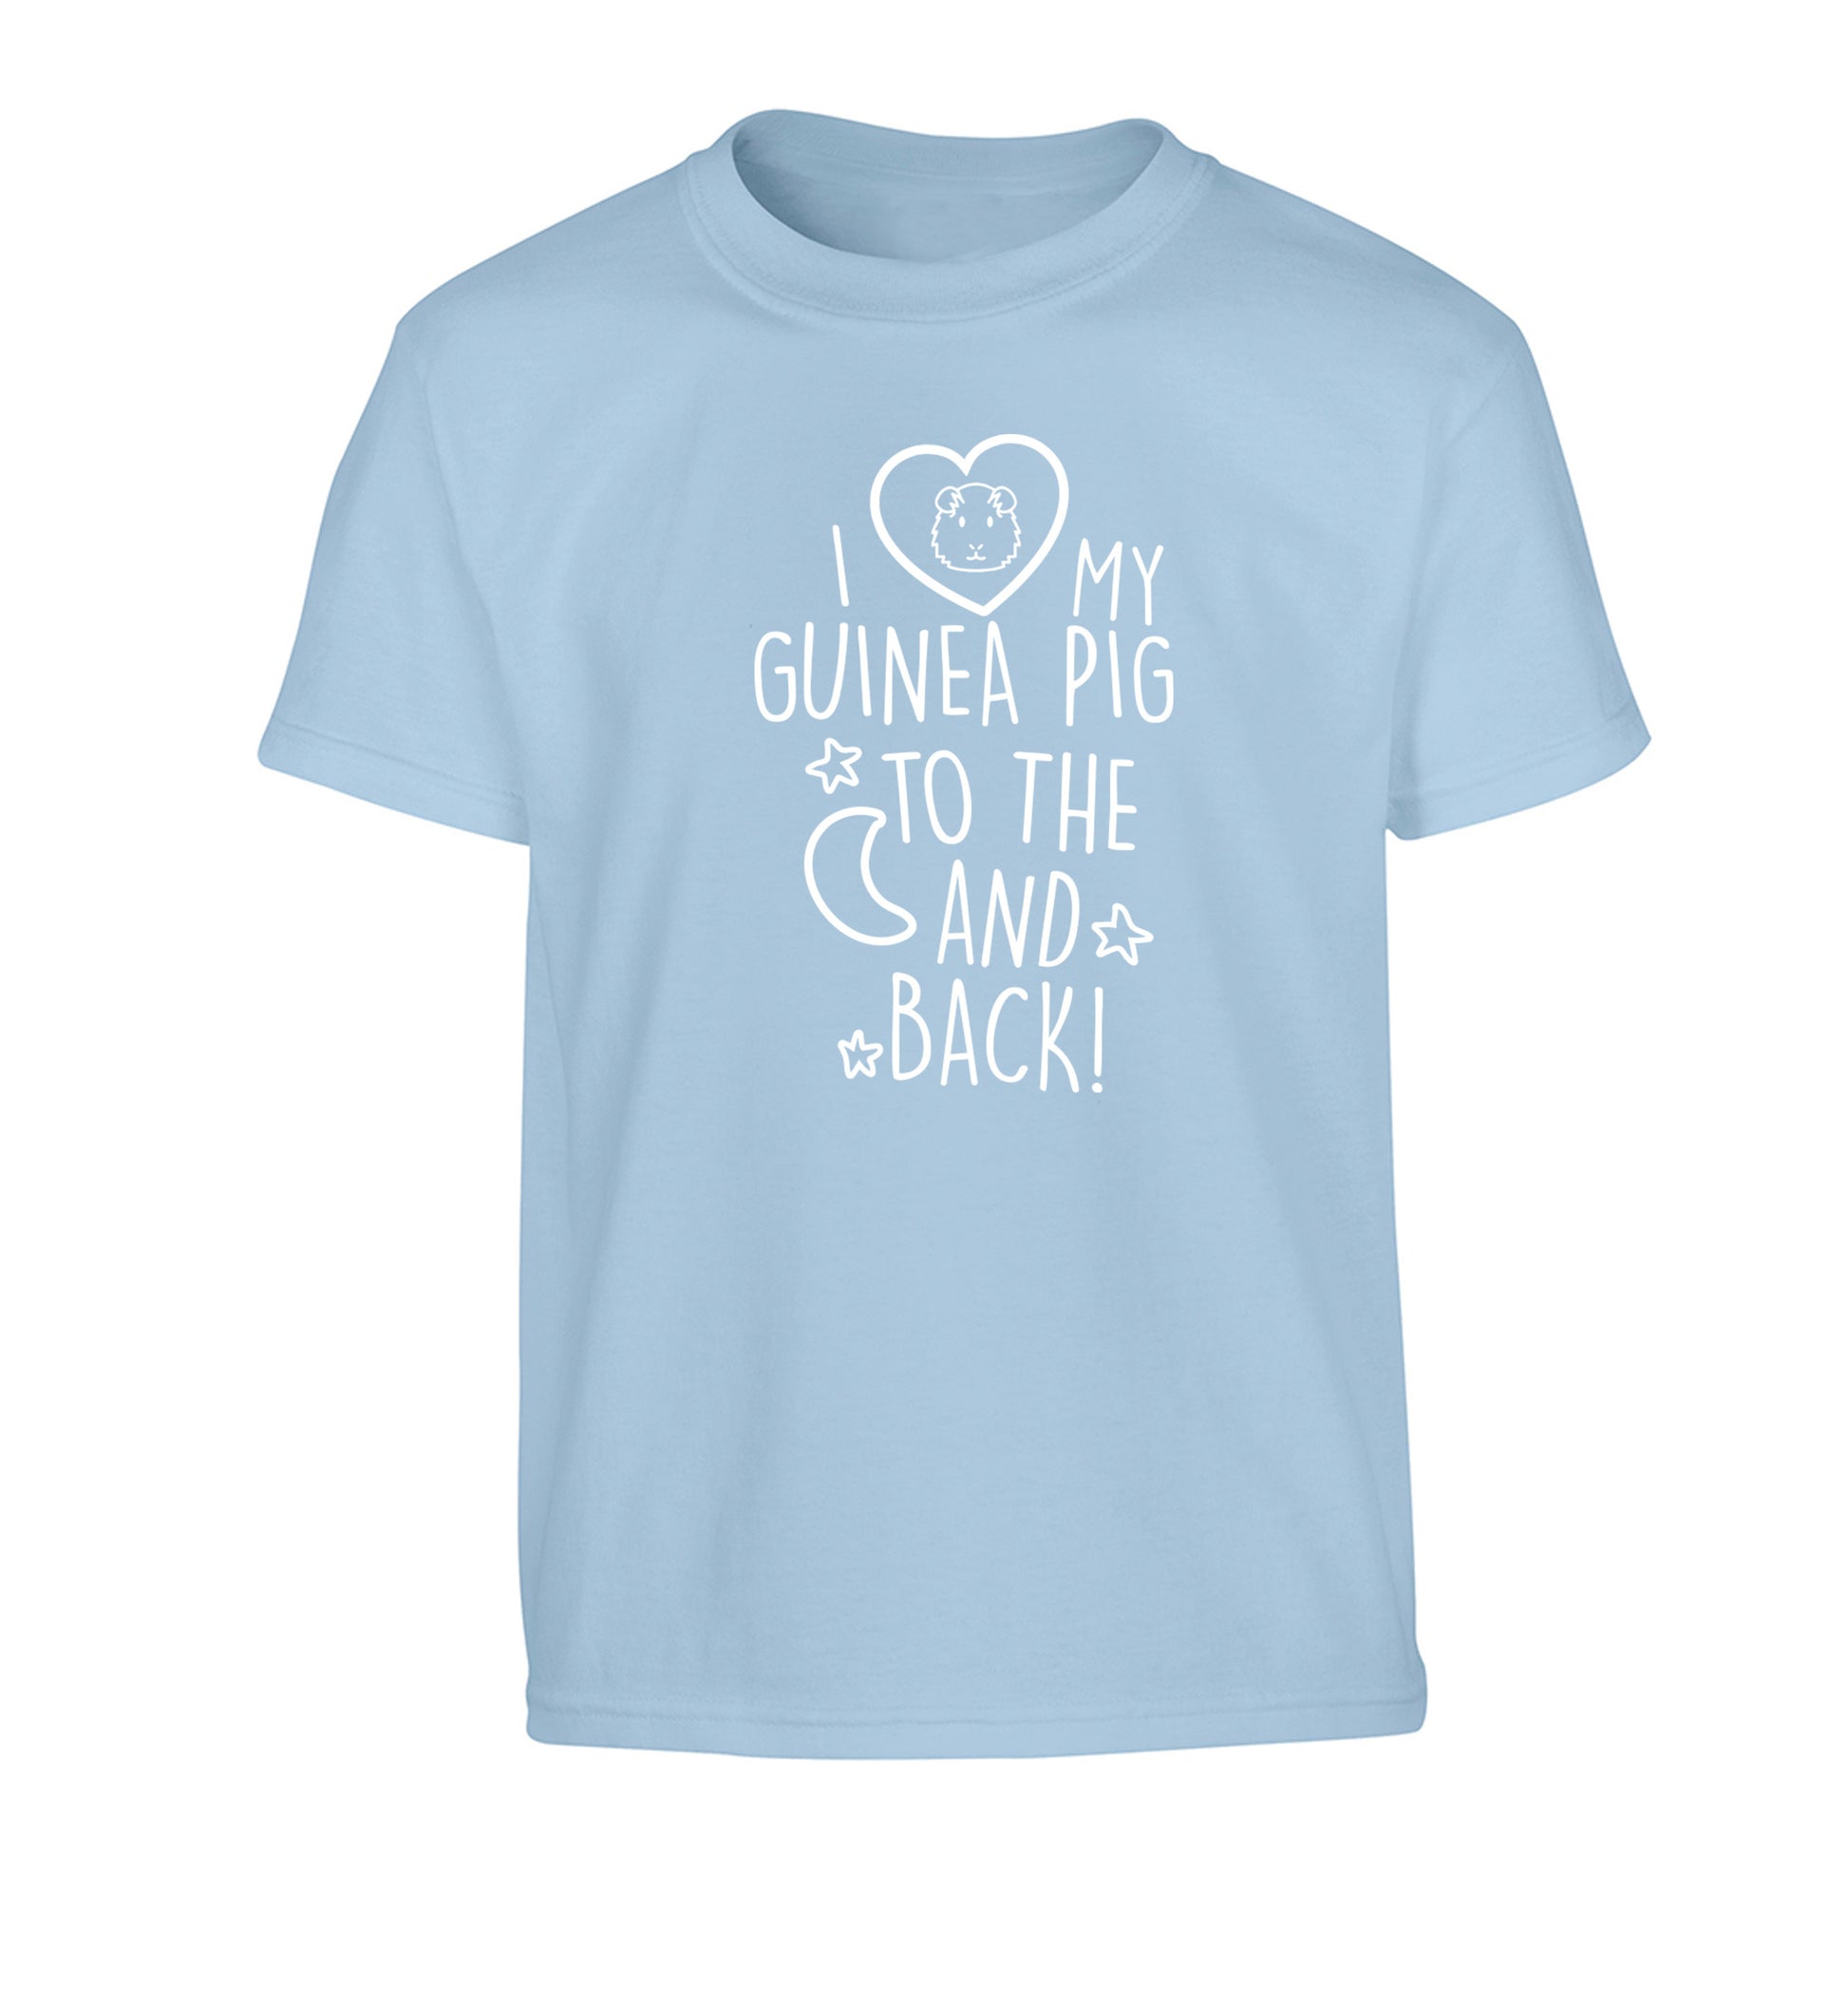 I love my guinea pig to the moon and back Children's light blue Tshirt 12-14 Years